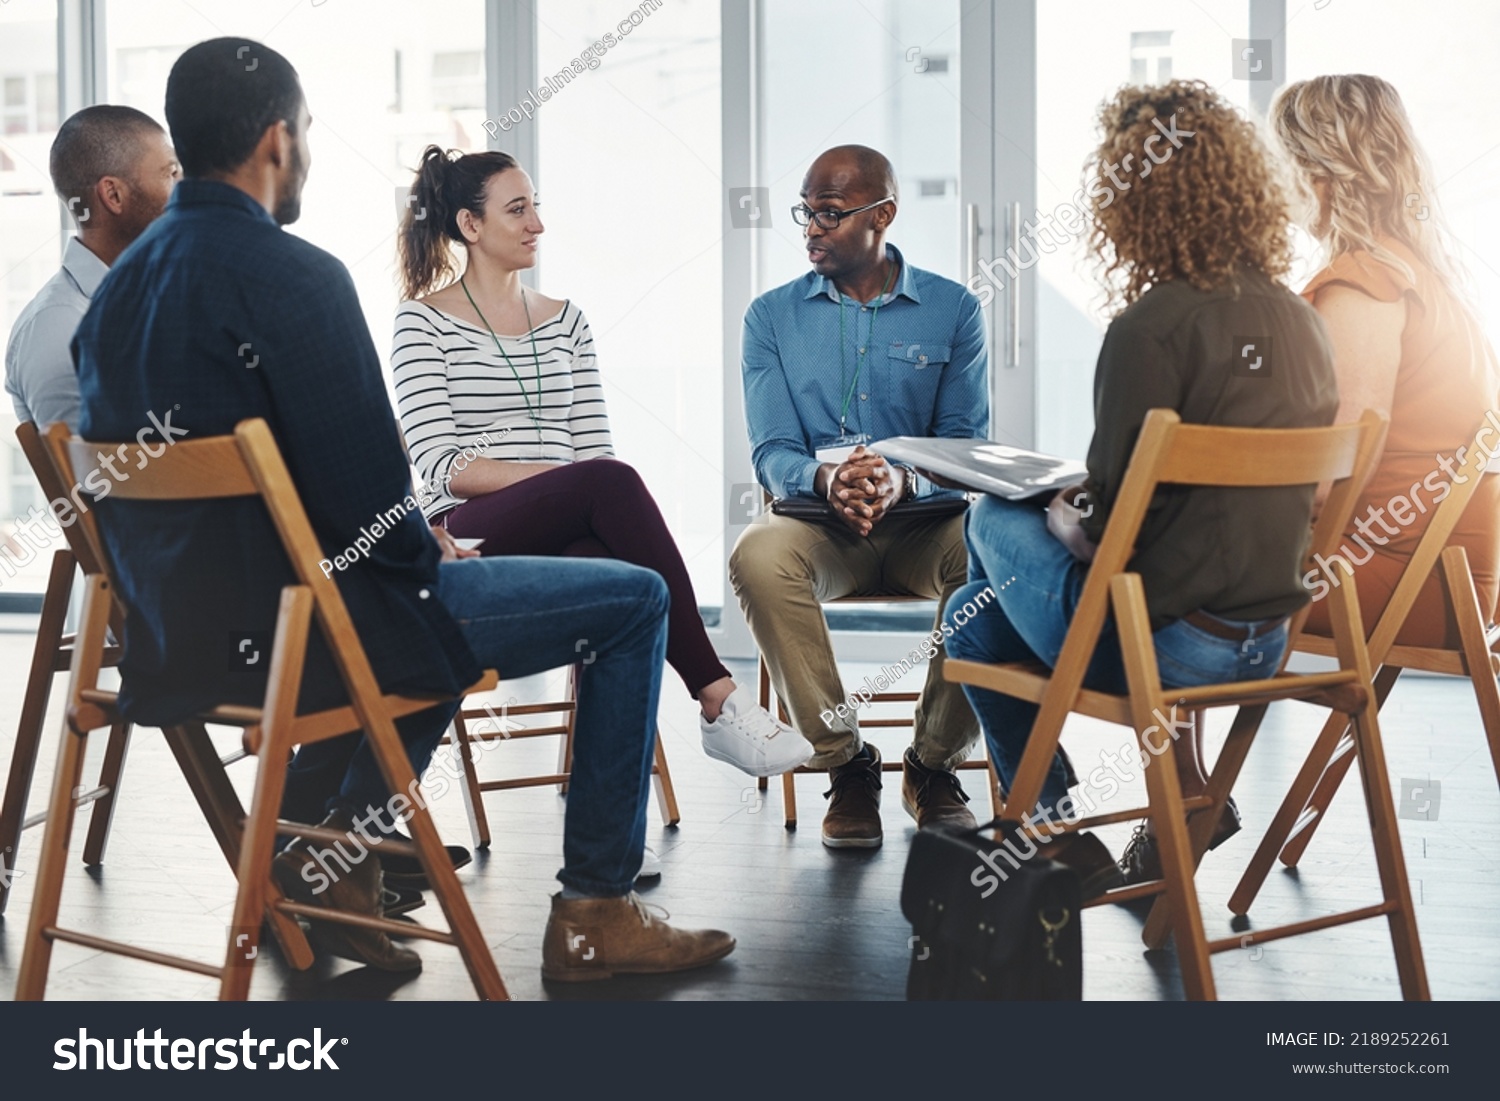 A group therapy session with diverse people sharing their sad problems and stories. People sitting in a circle talking about their mental health issues and looking for support, help and counseling #2189252261